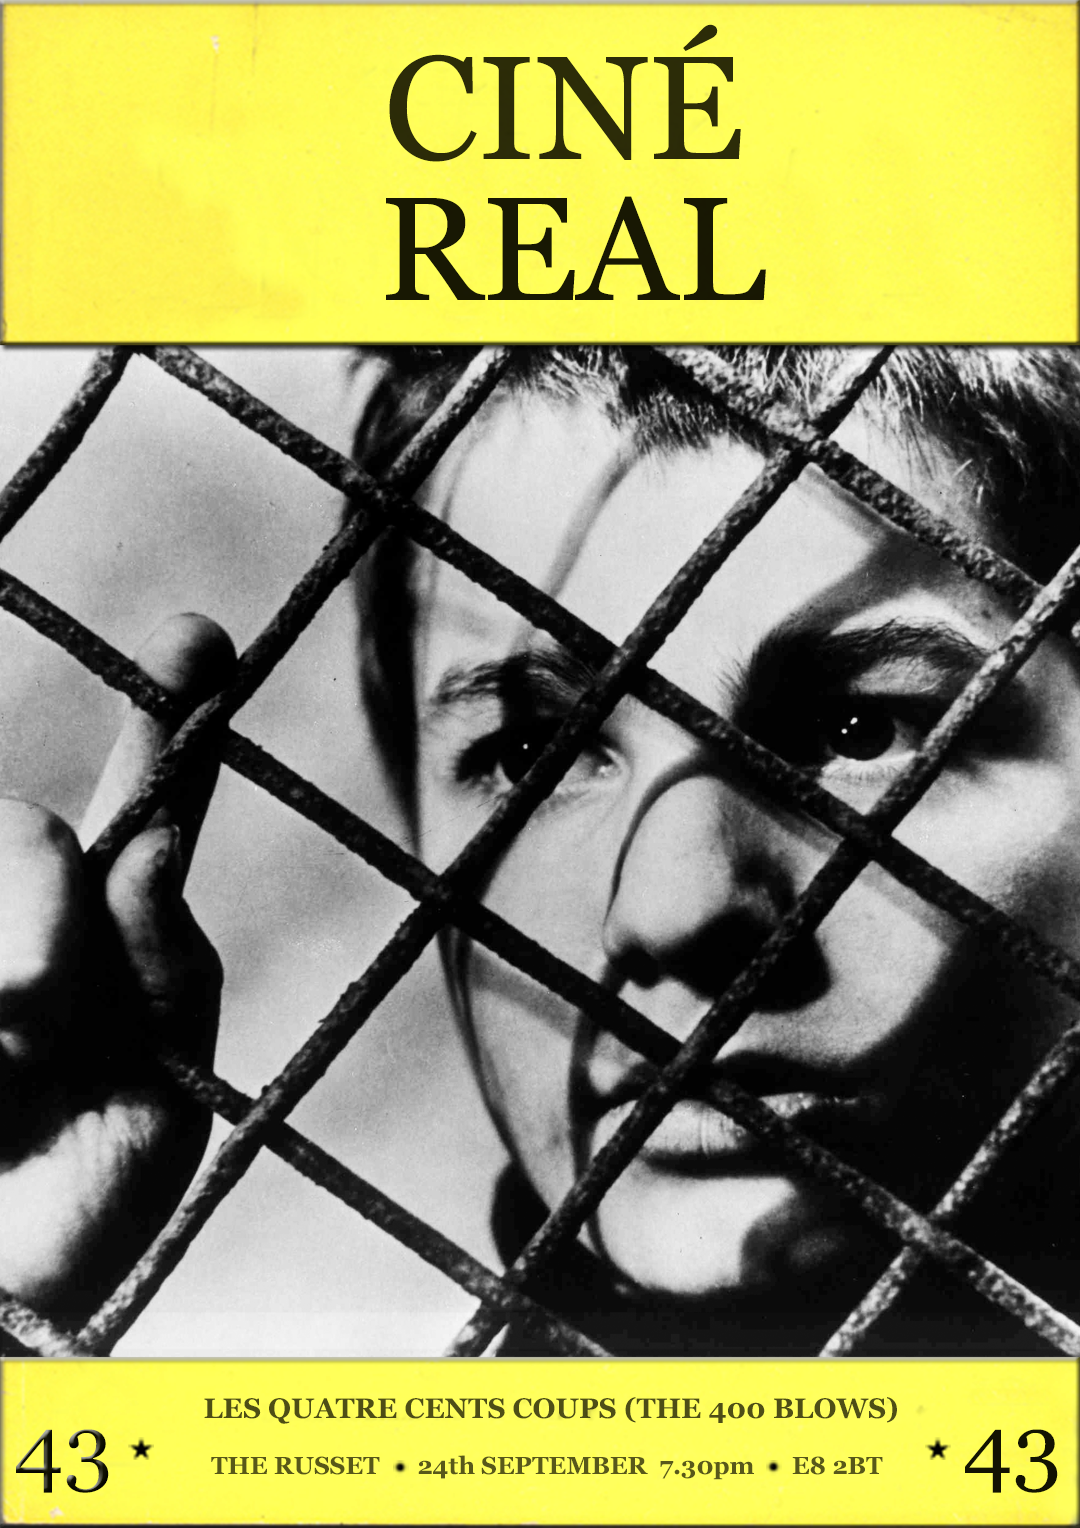 CINE-REAL-43-400-blows